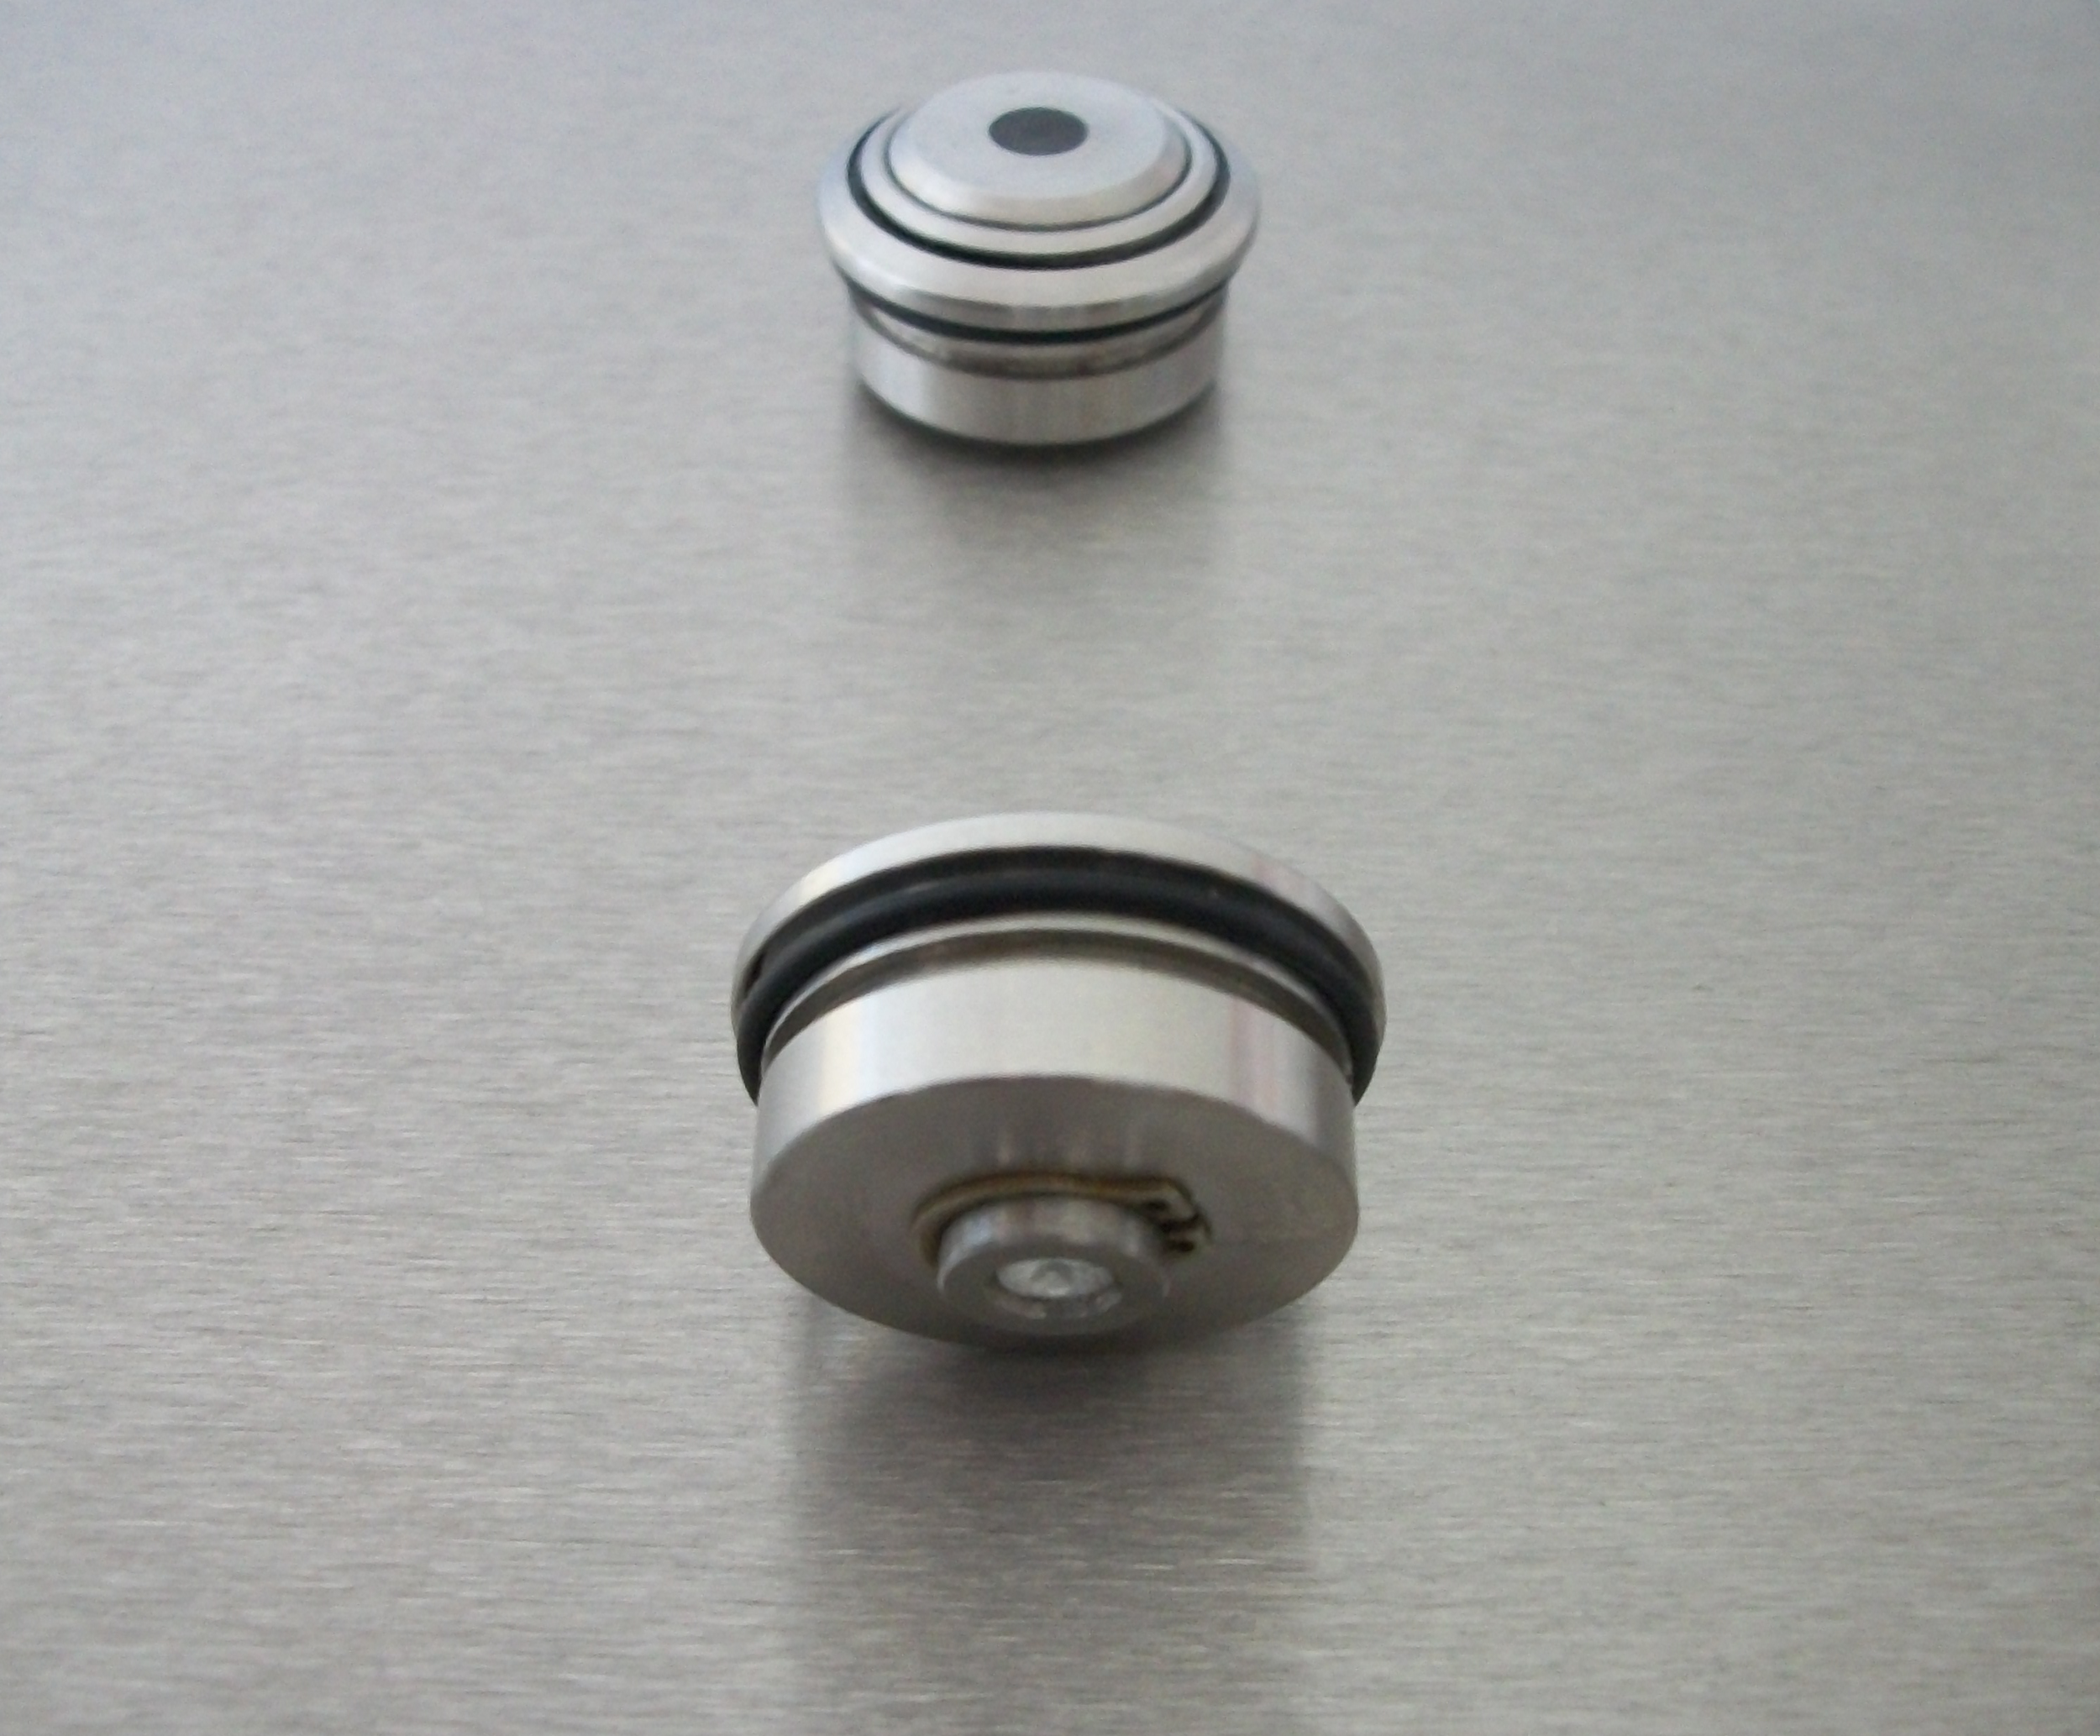 CJA's NEMA 4X VX-I Button - Machined From 304 or 316 To Last!